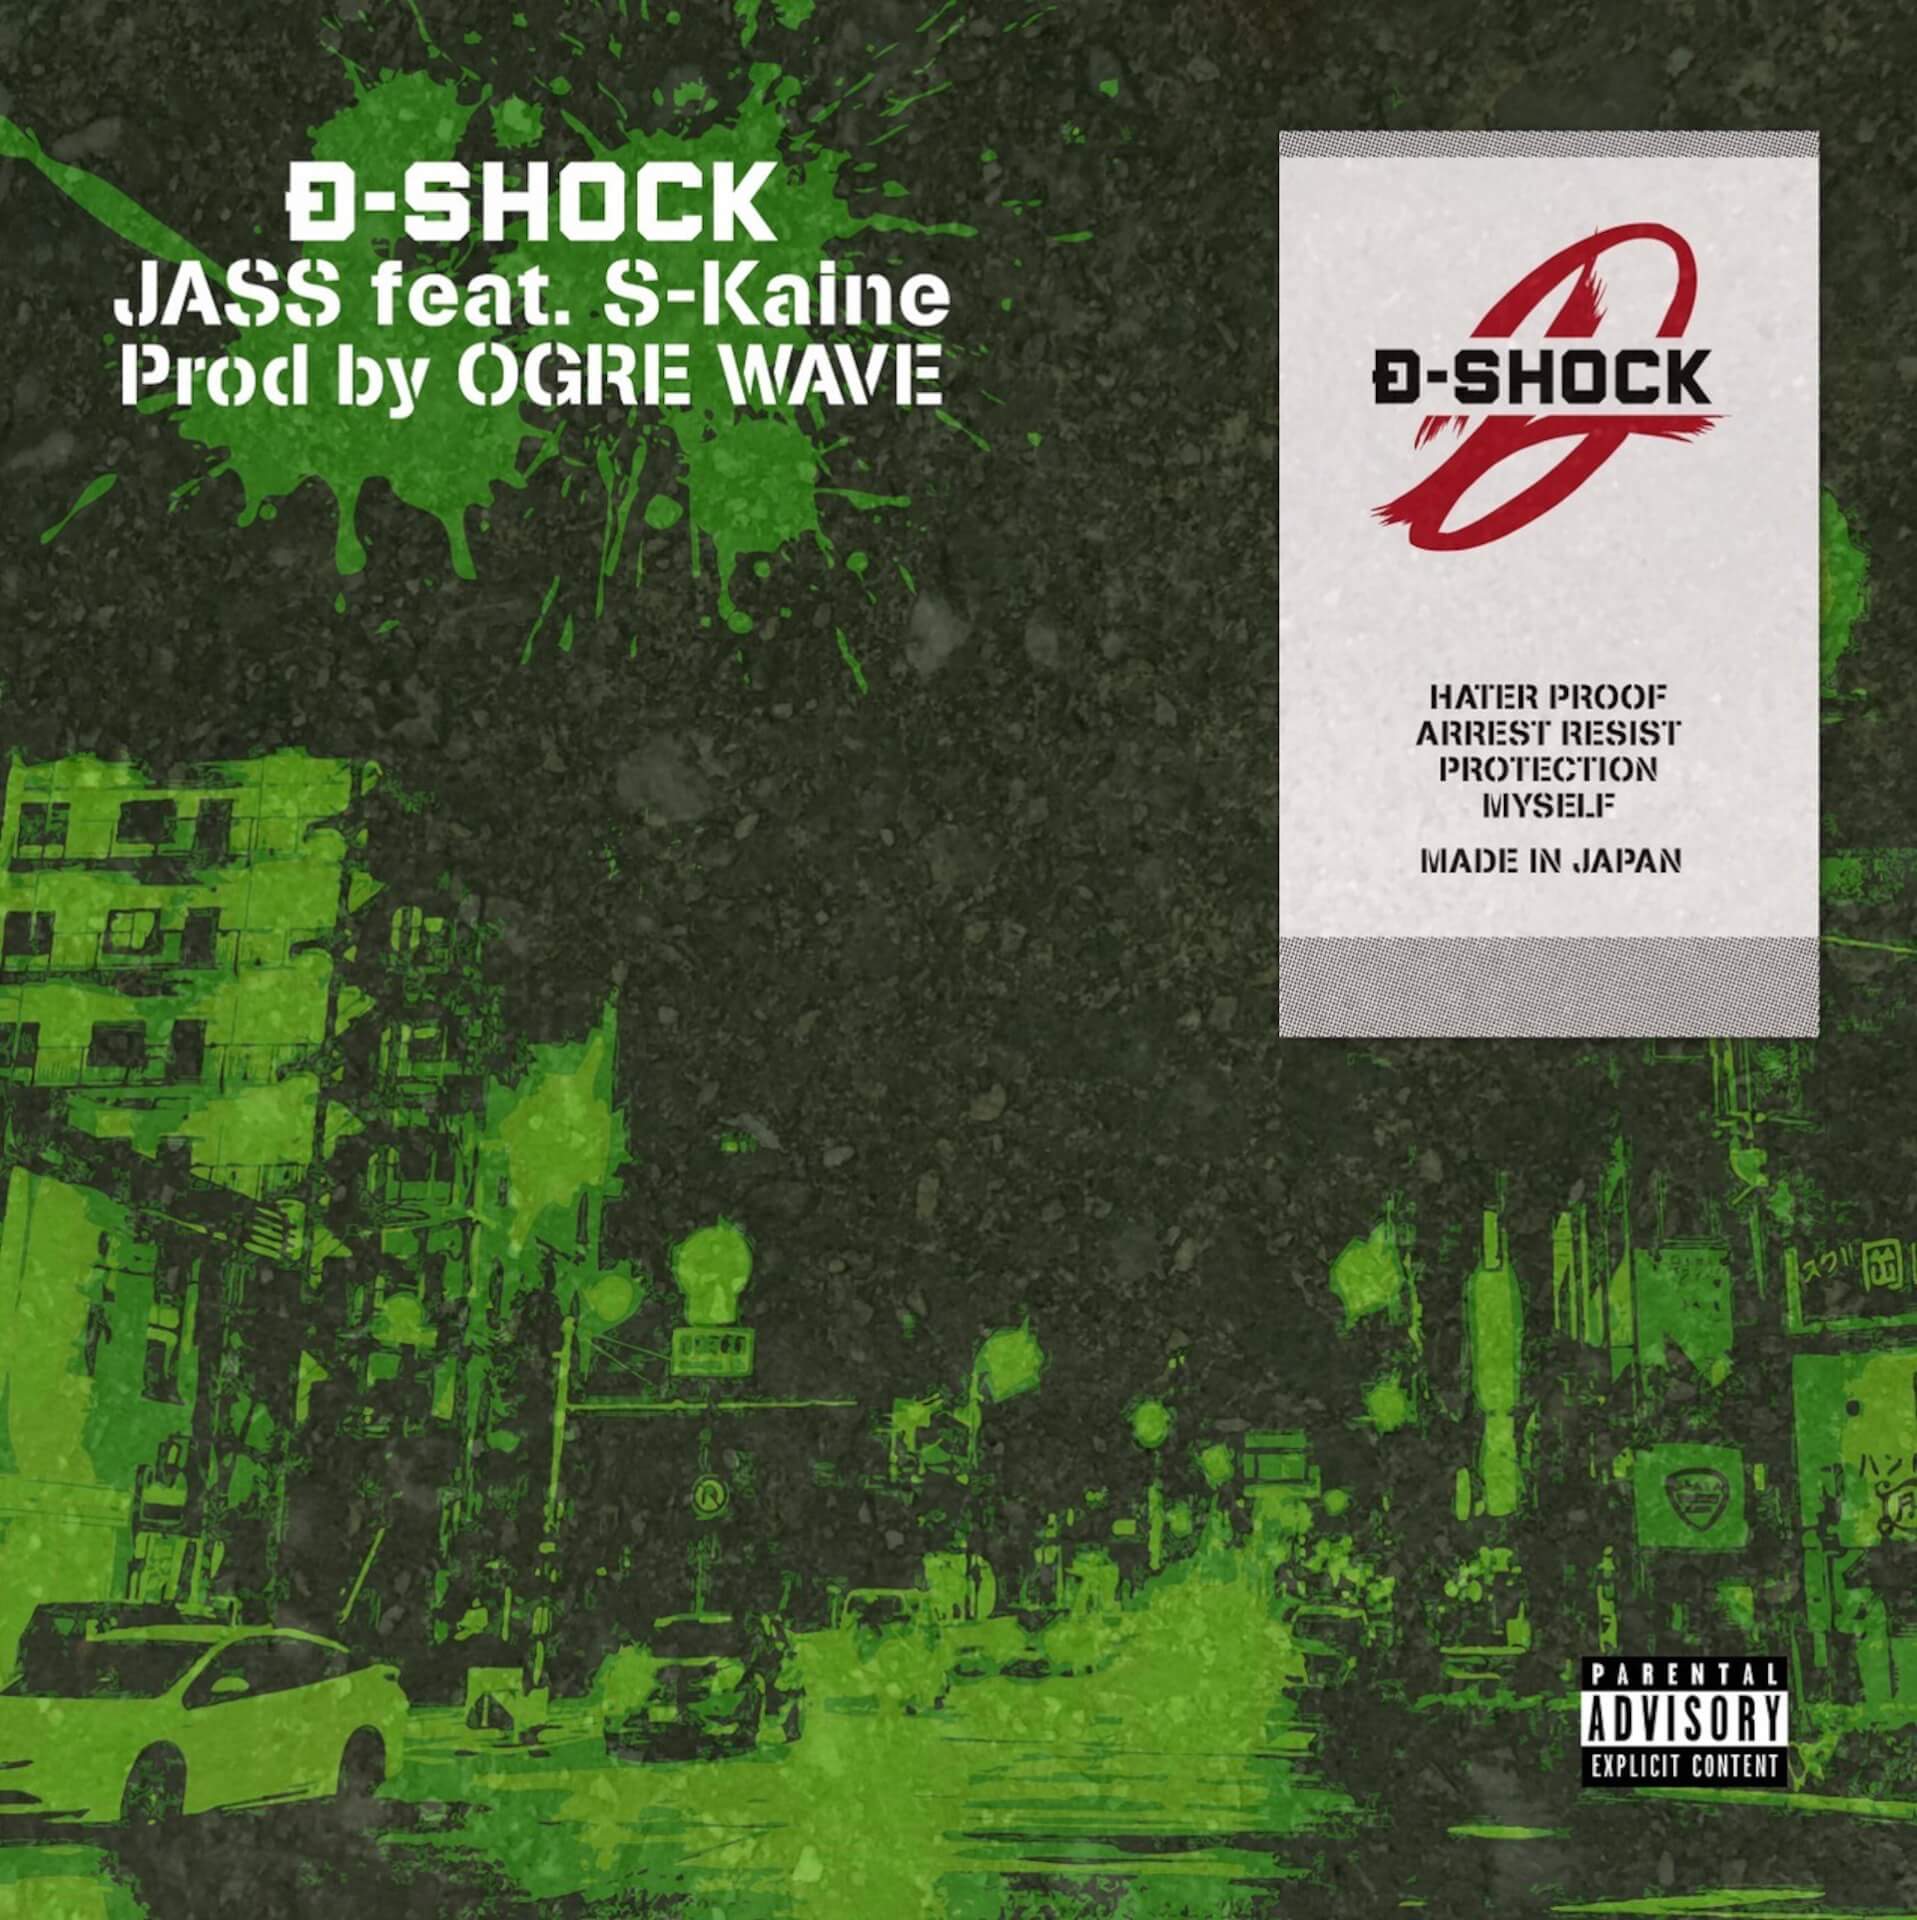 Tha JointzのJASSによる新曲”D-SHOCK feat.S-kaine“がリリース！OGRE WAVEがプロデュース music210527_jass_2